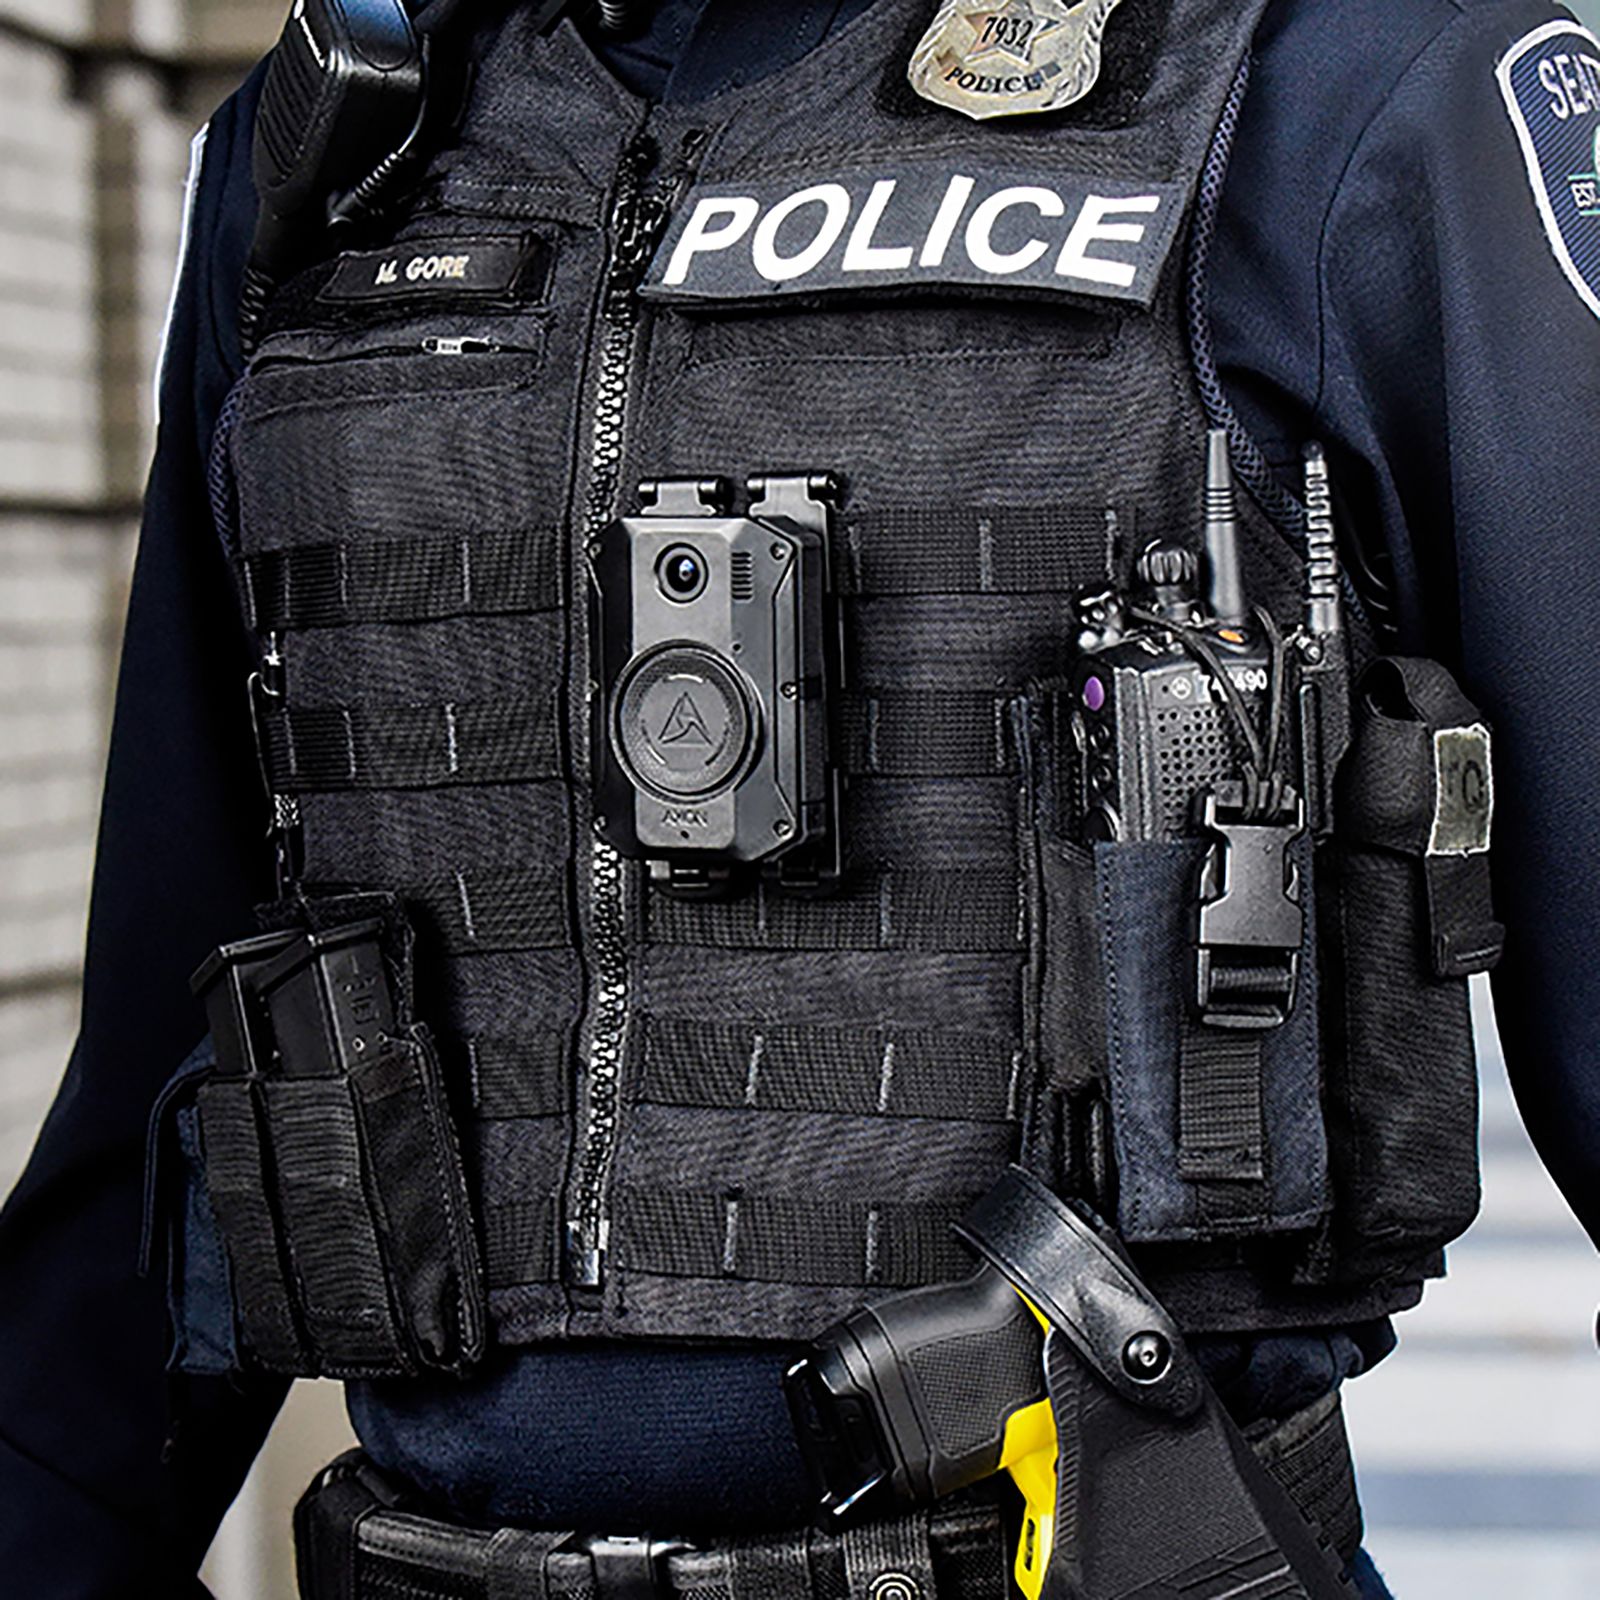 Cost of body cameras is a setback for Milwaukee area departments